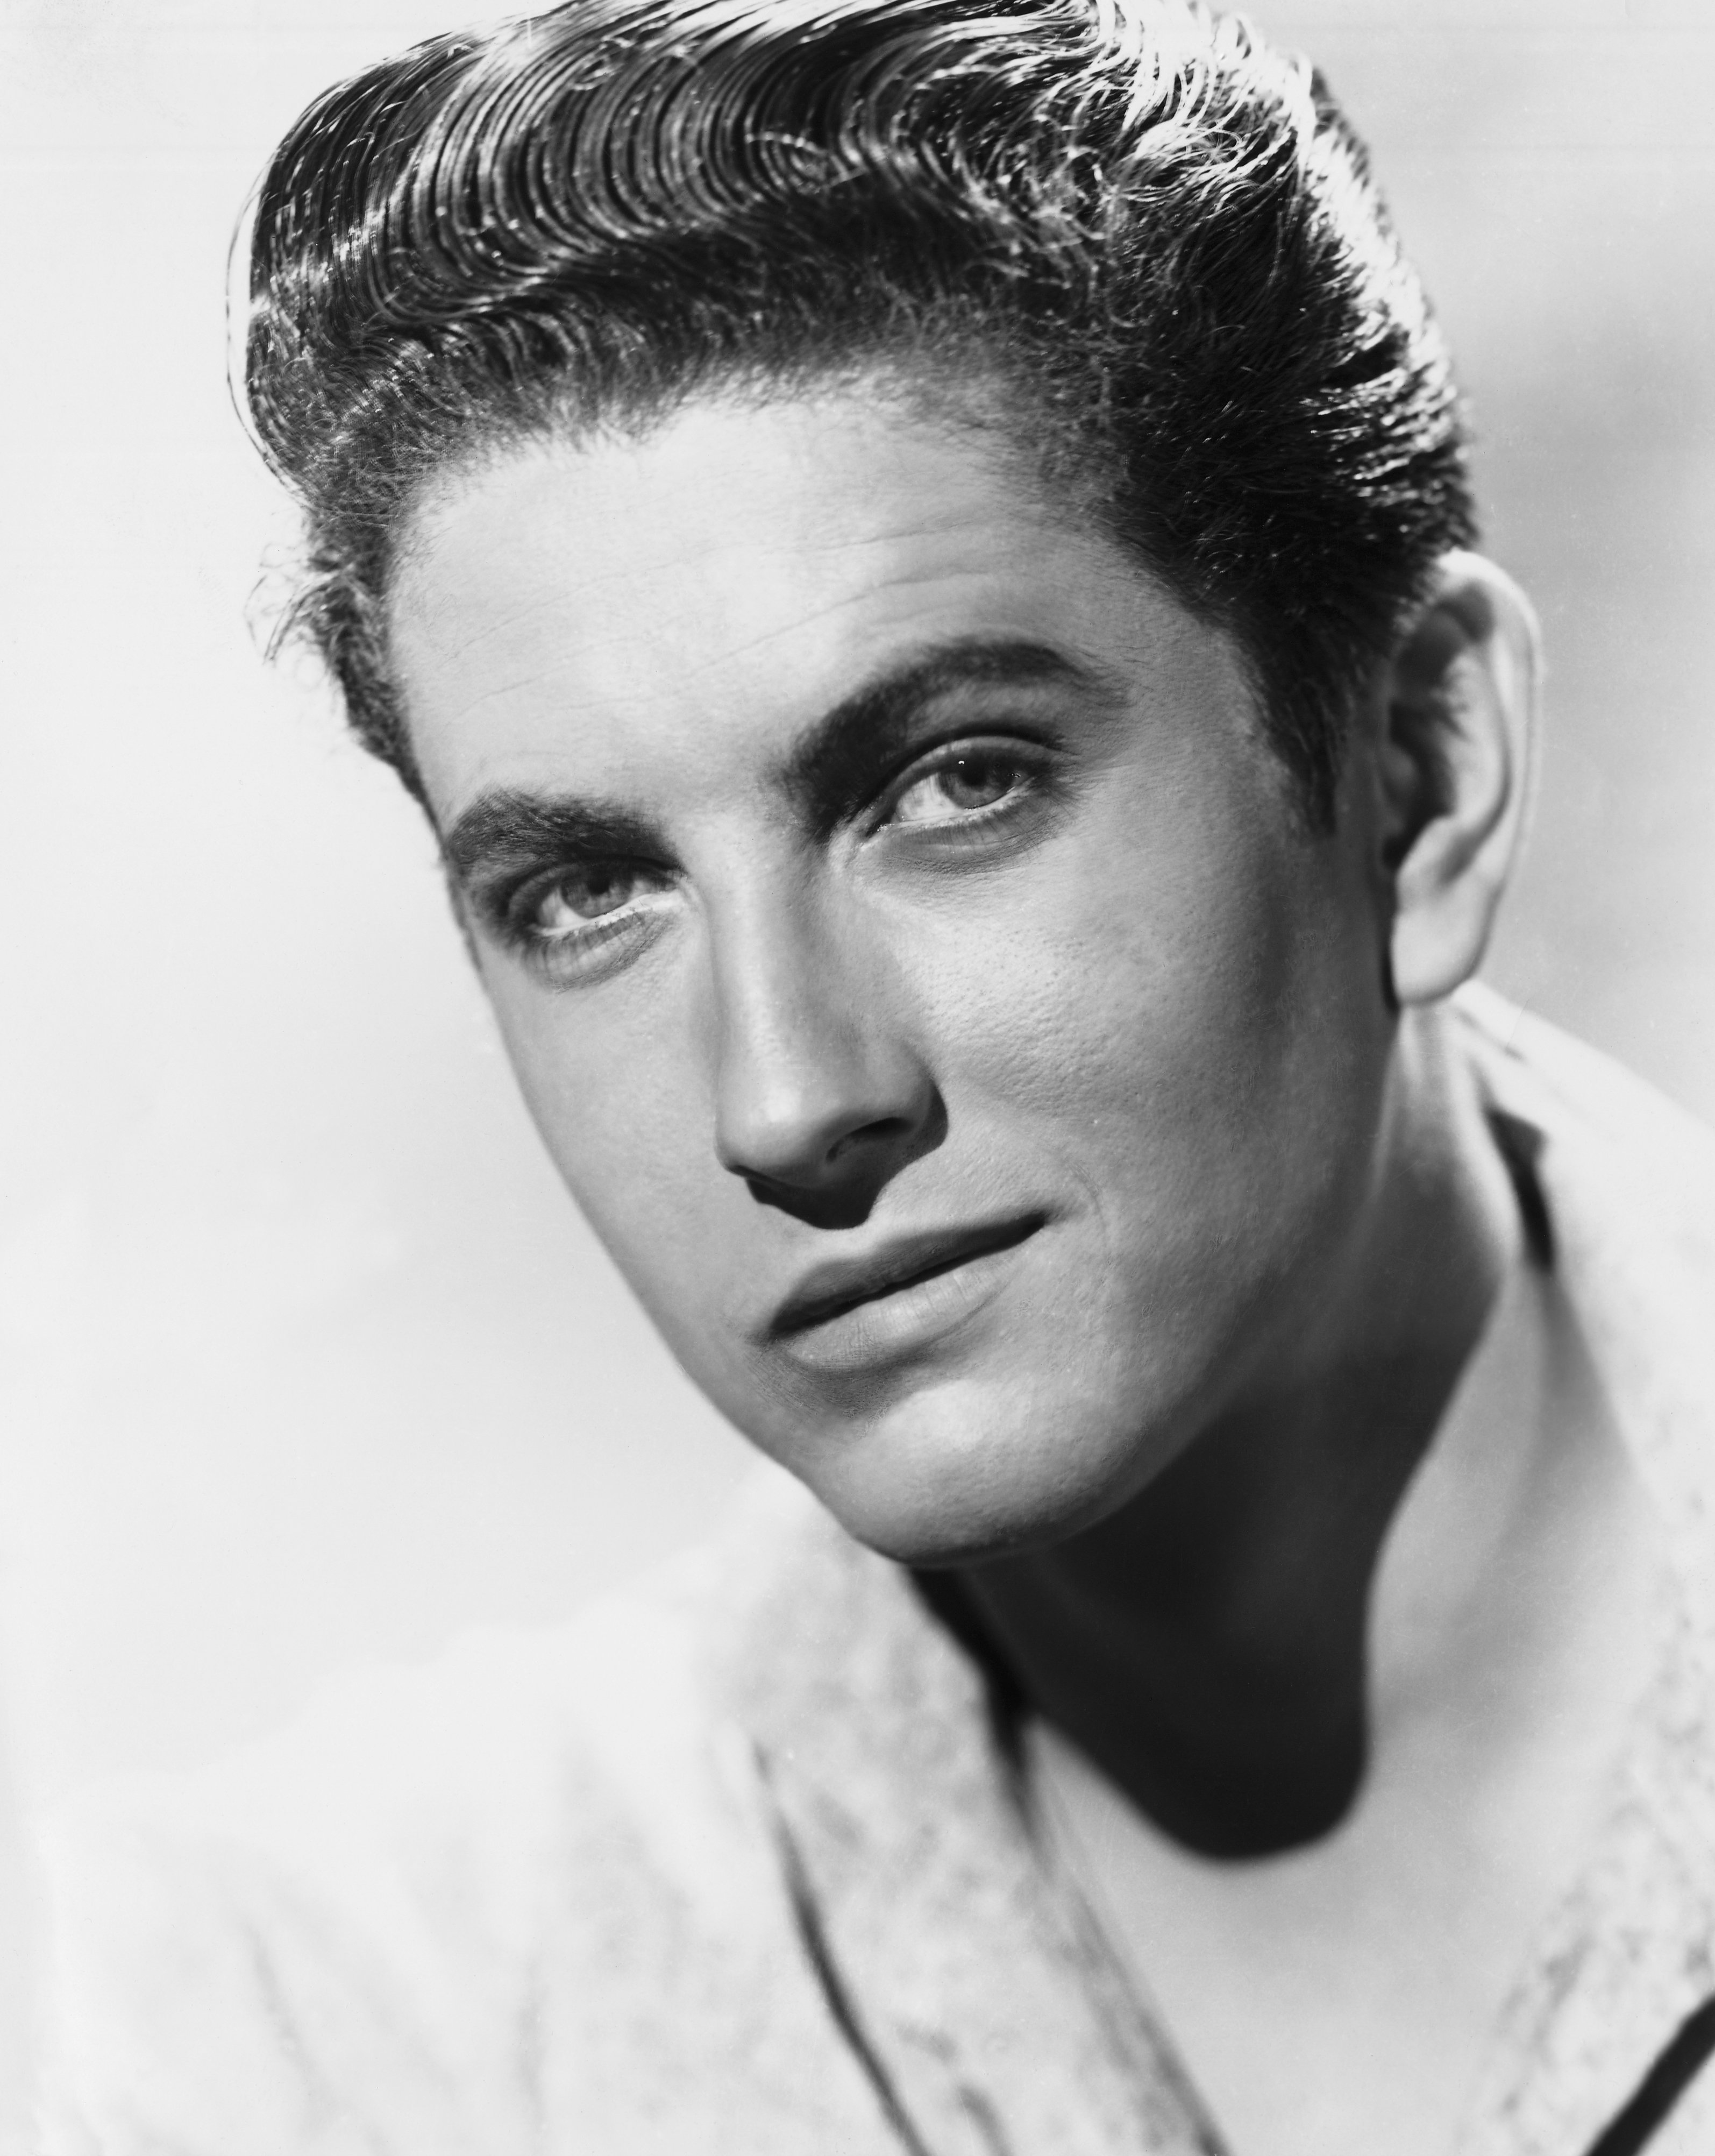 Portrait of John Drew Barrymore for "The Sundowners" | Source: Getty Images